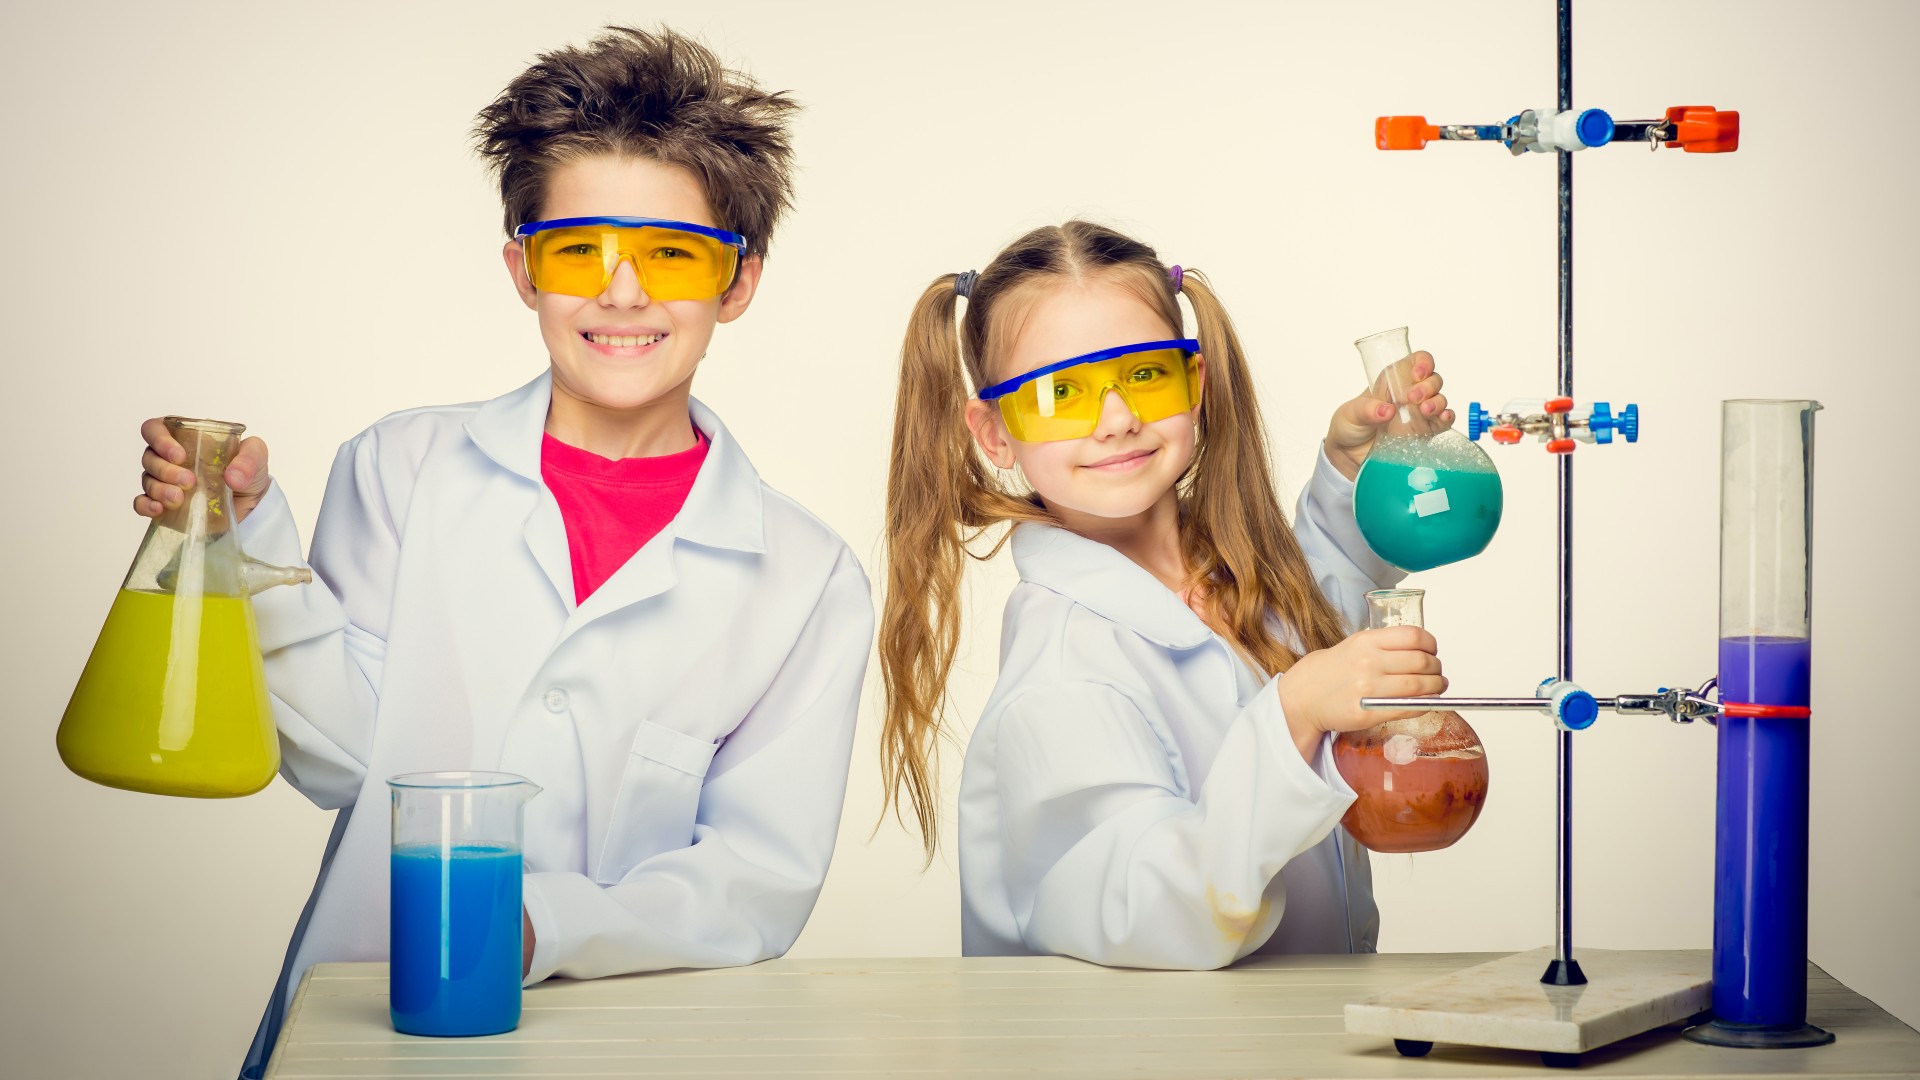 23 Best Science Kits For Kids In 2024, As Per Toy Experts